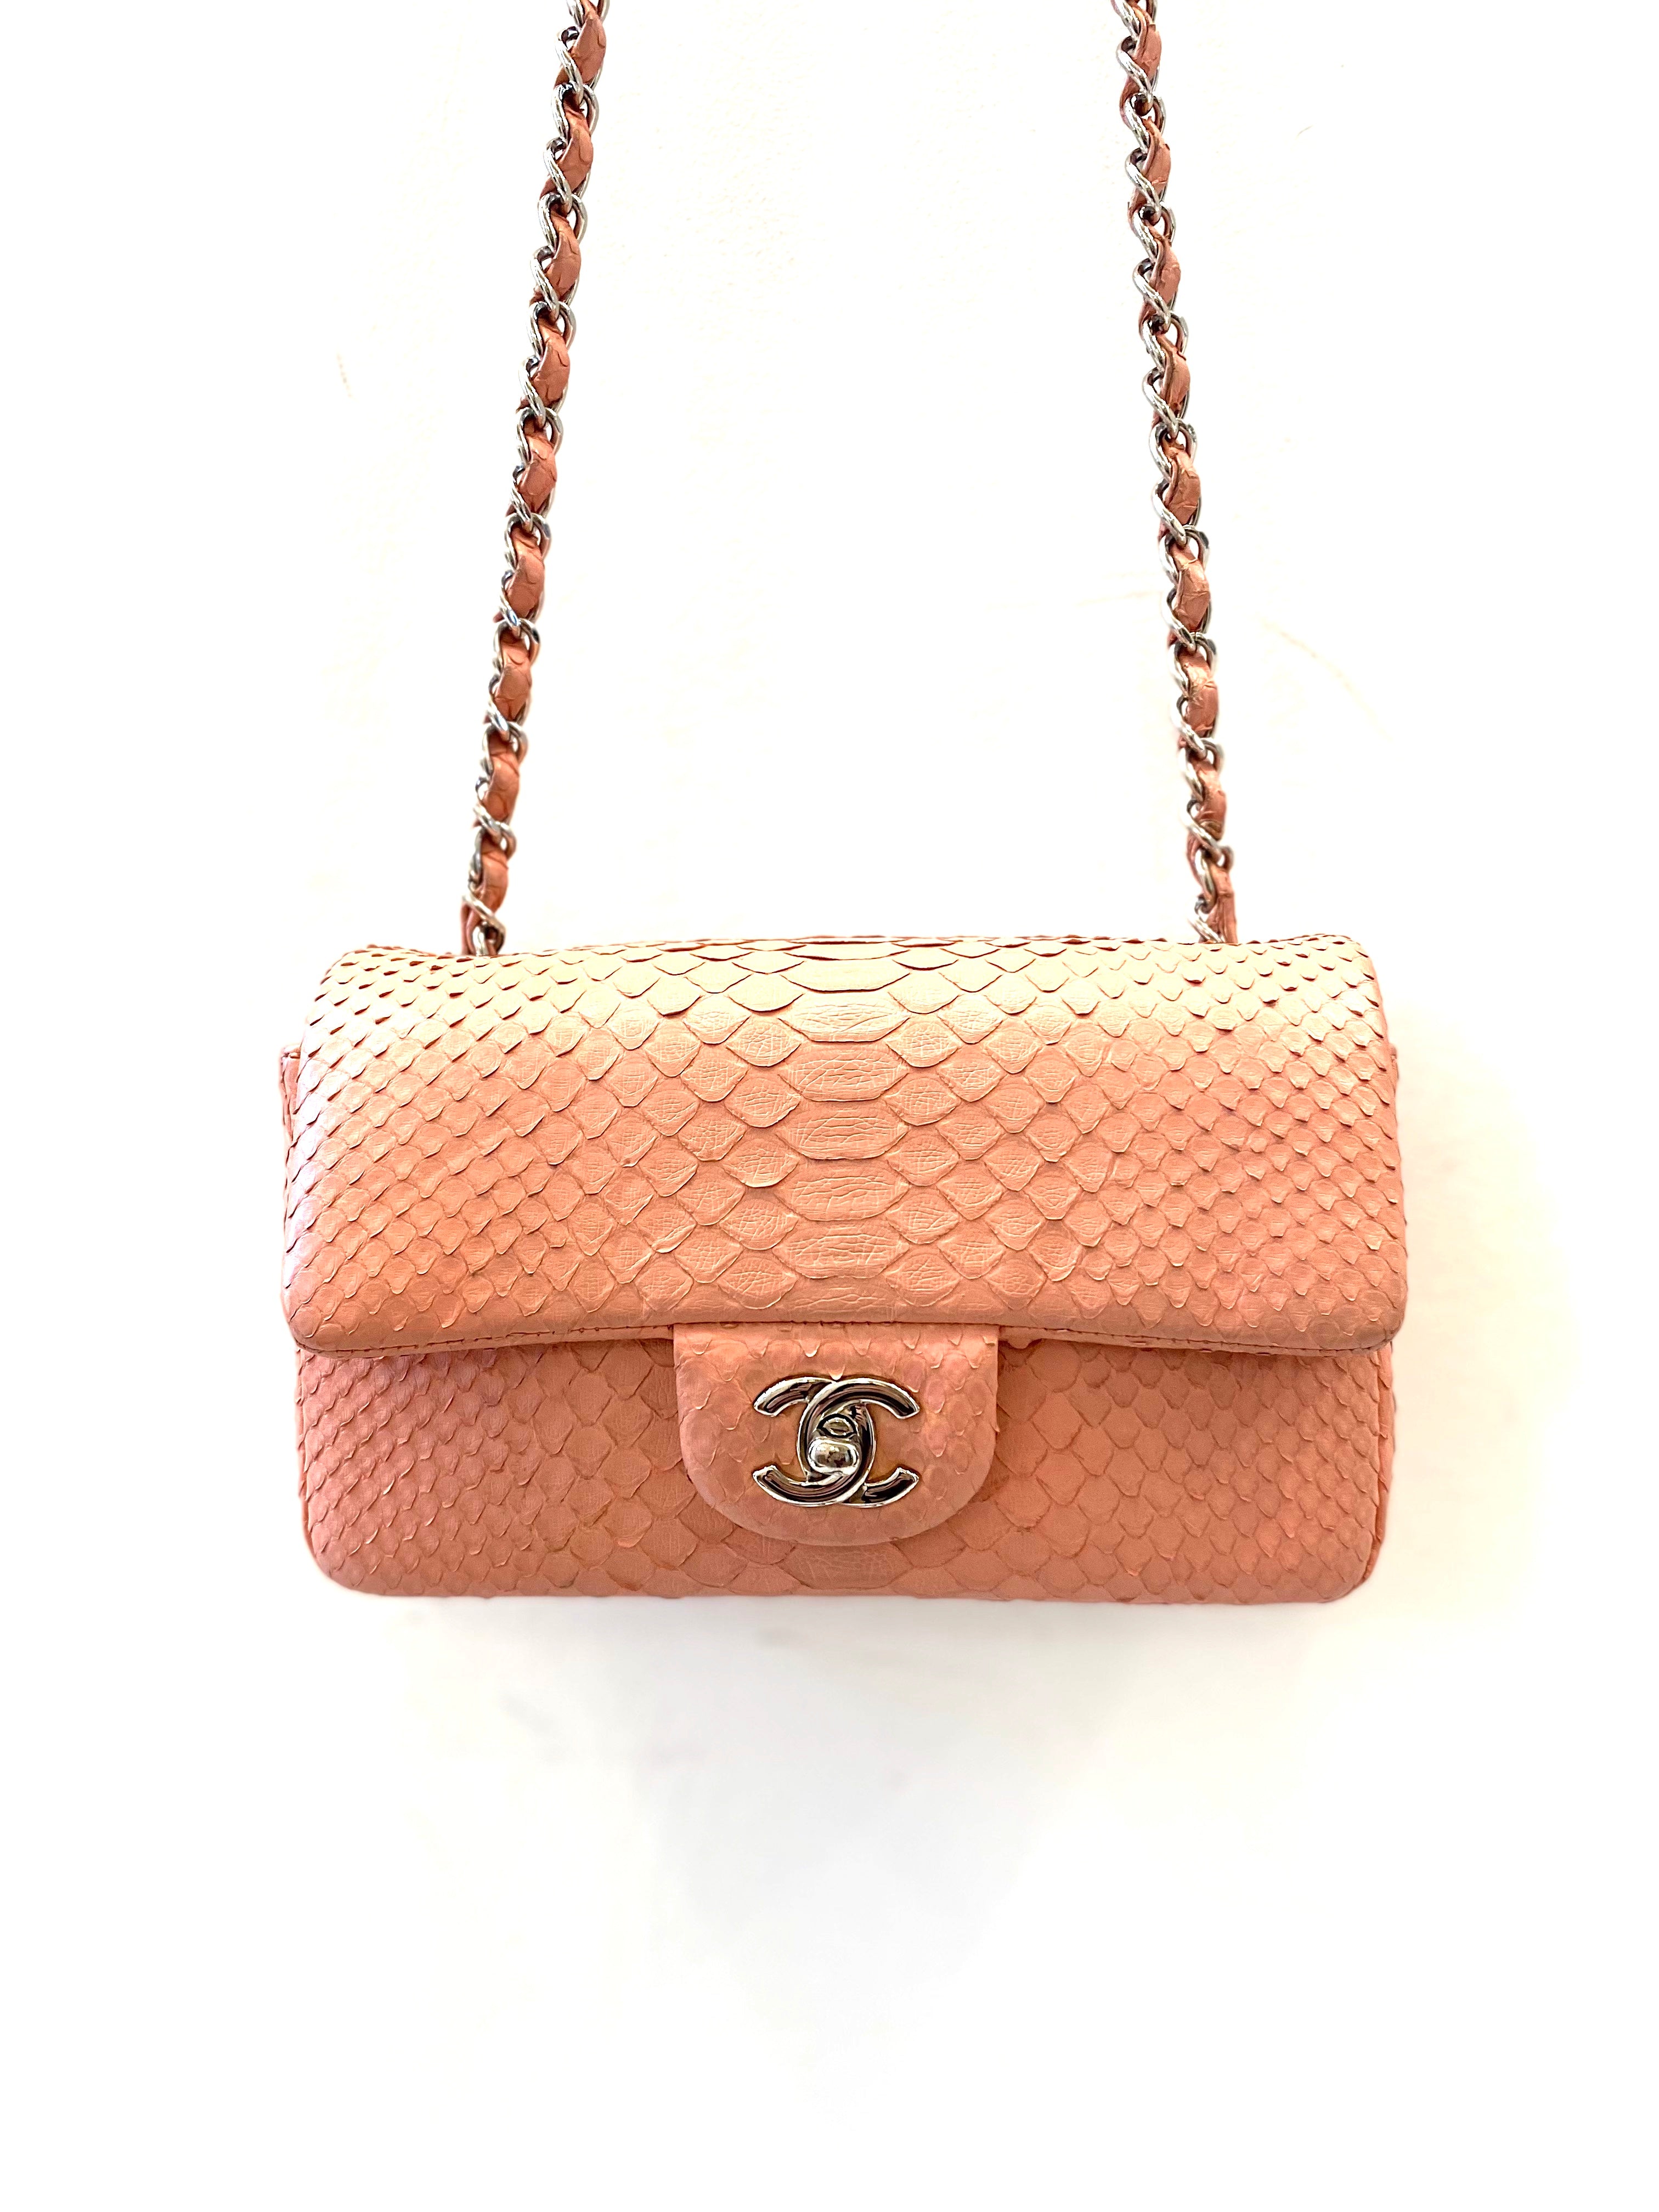 Chanel classic flap bag hot pink small  Chanel mini flap bag, Pink chanel  bag, Chanel classic flap bag